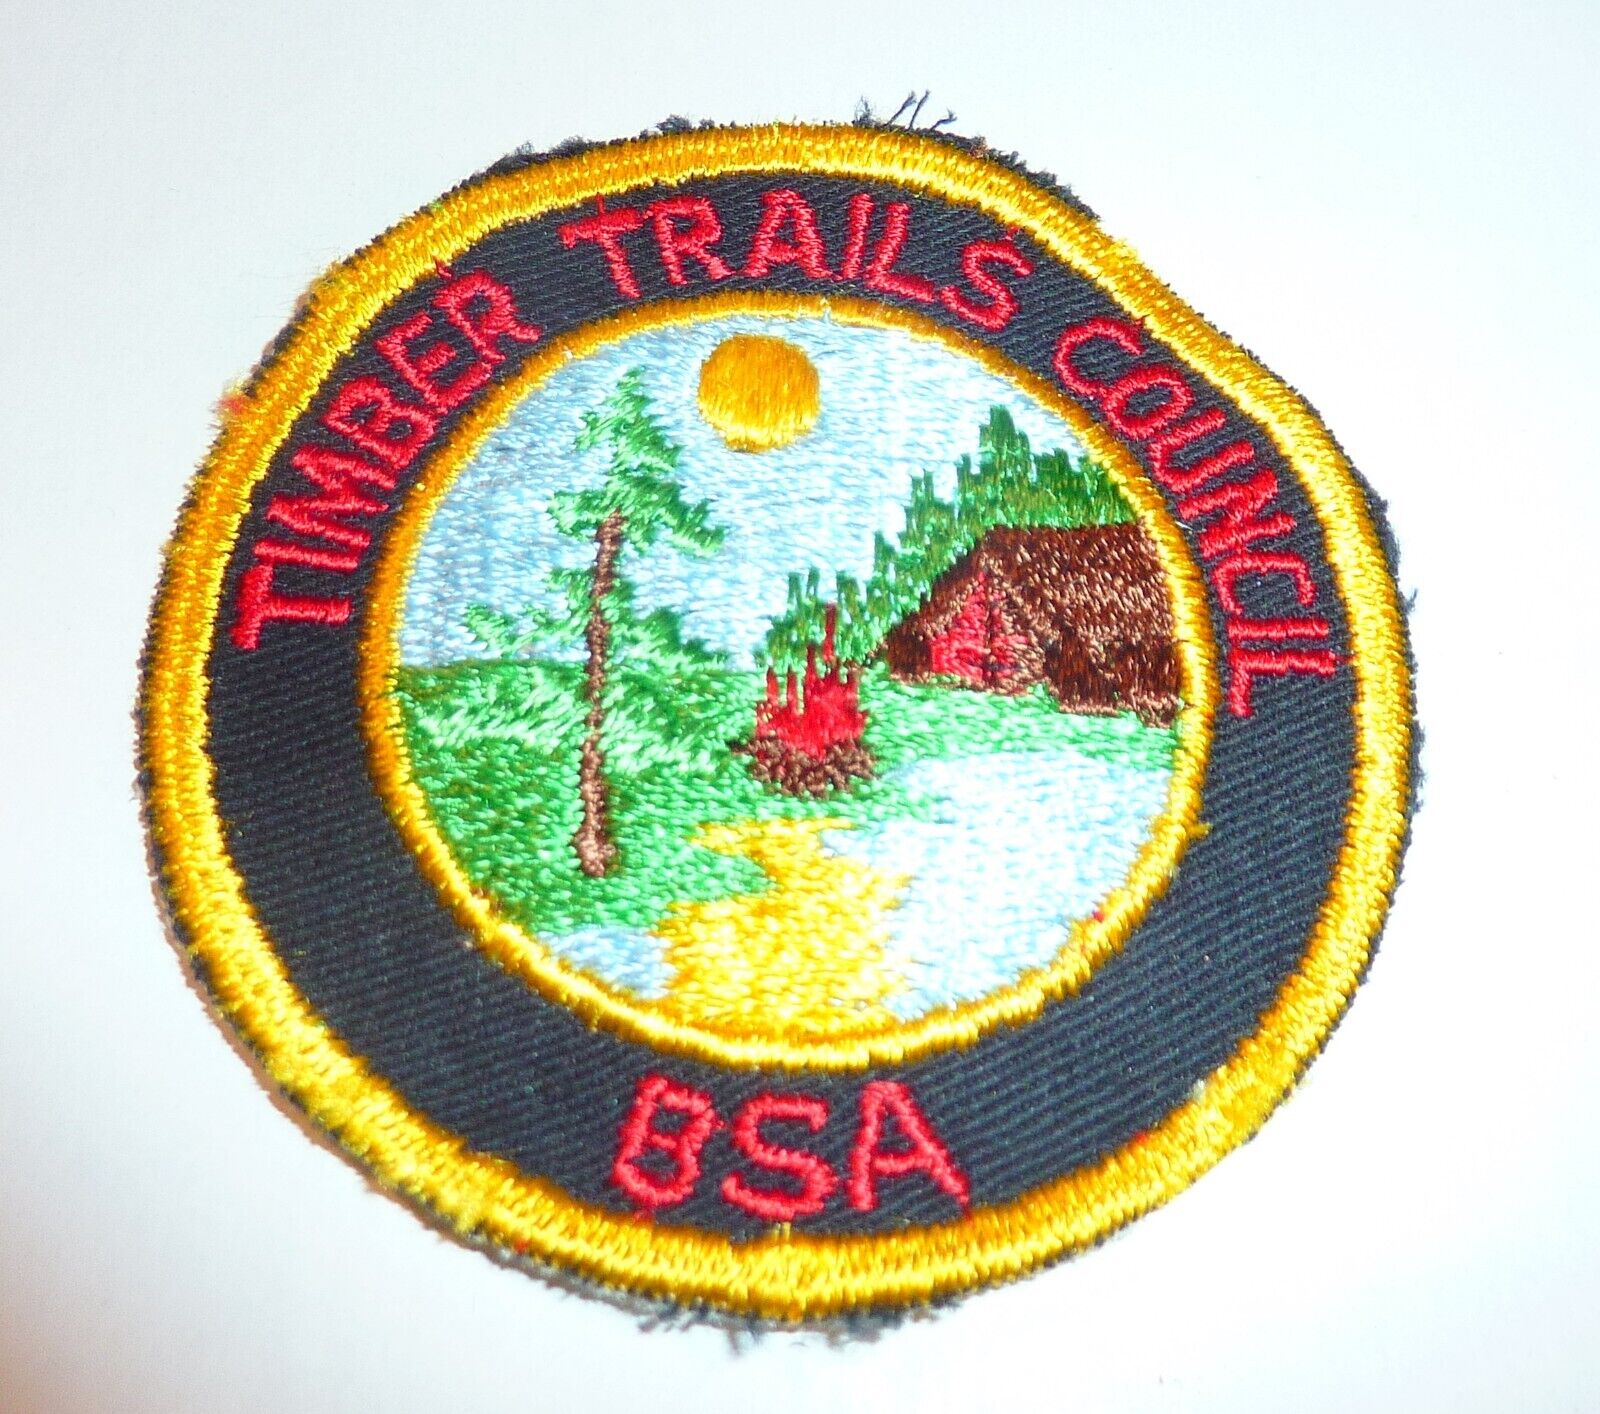 1960s Vintage Boy Scouts Patch  Great Condition  Timber Trails Council  CPICS